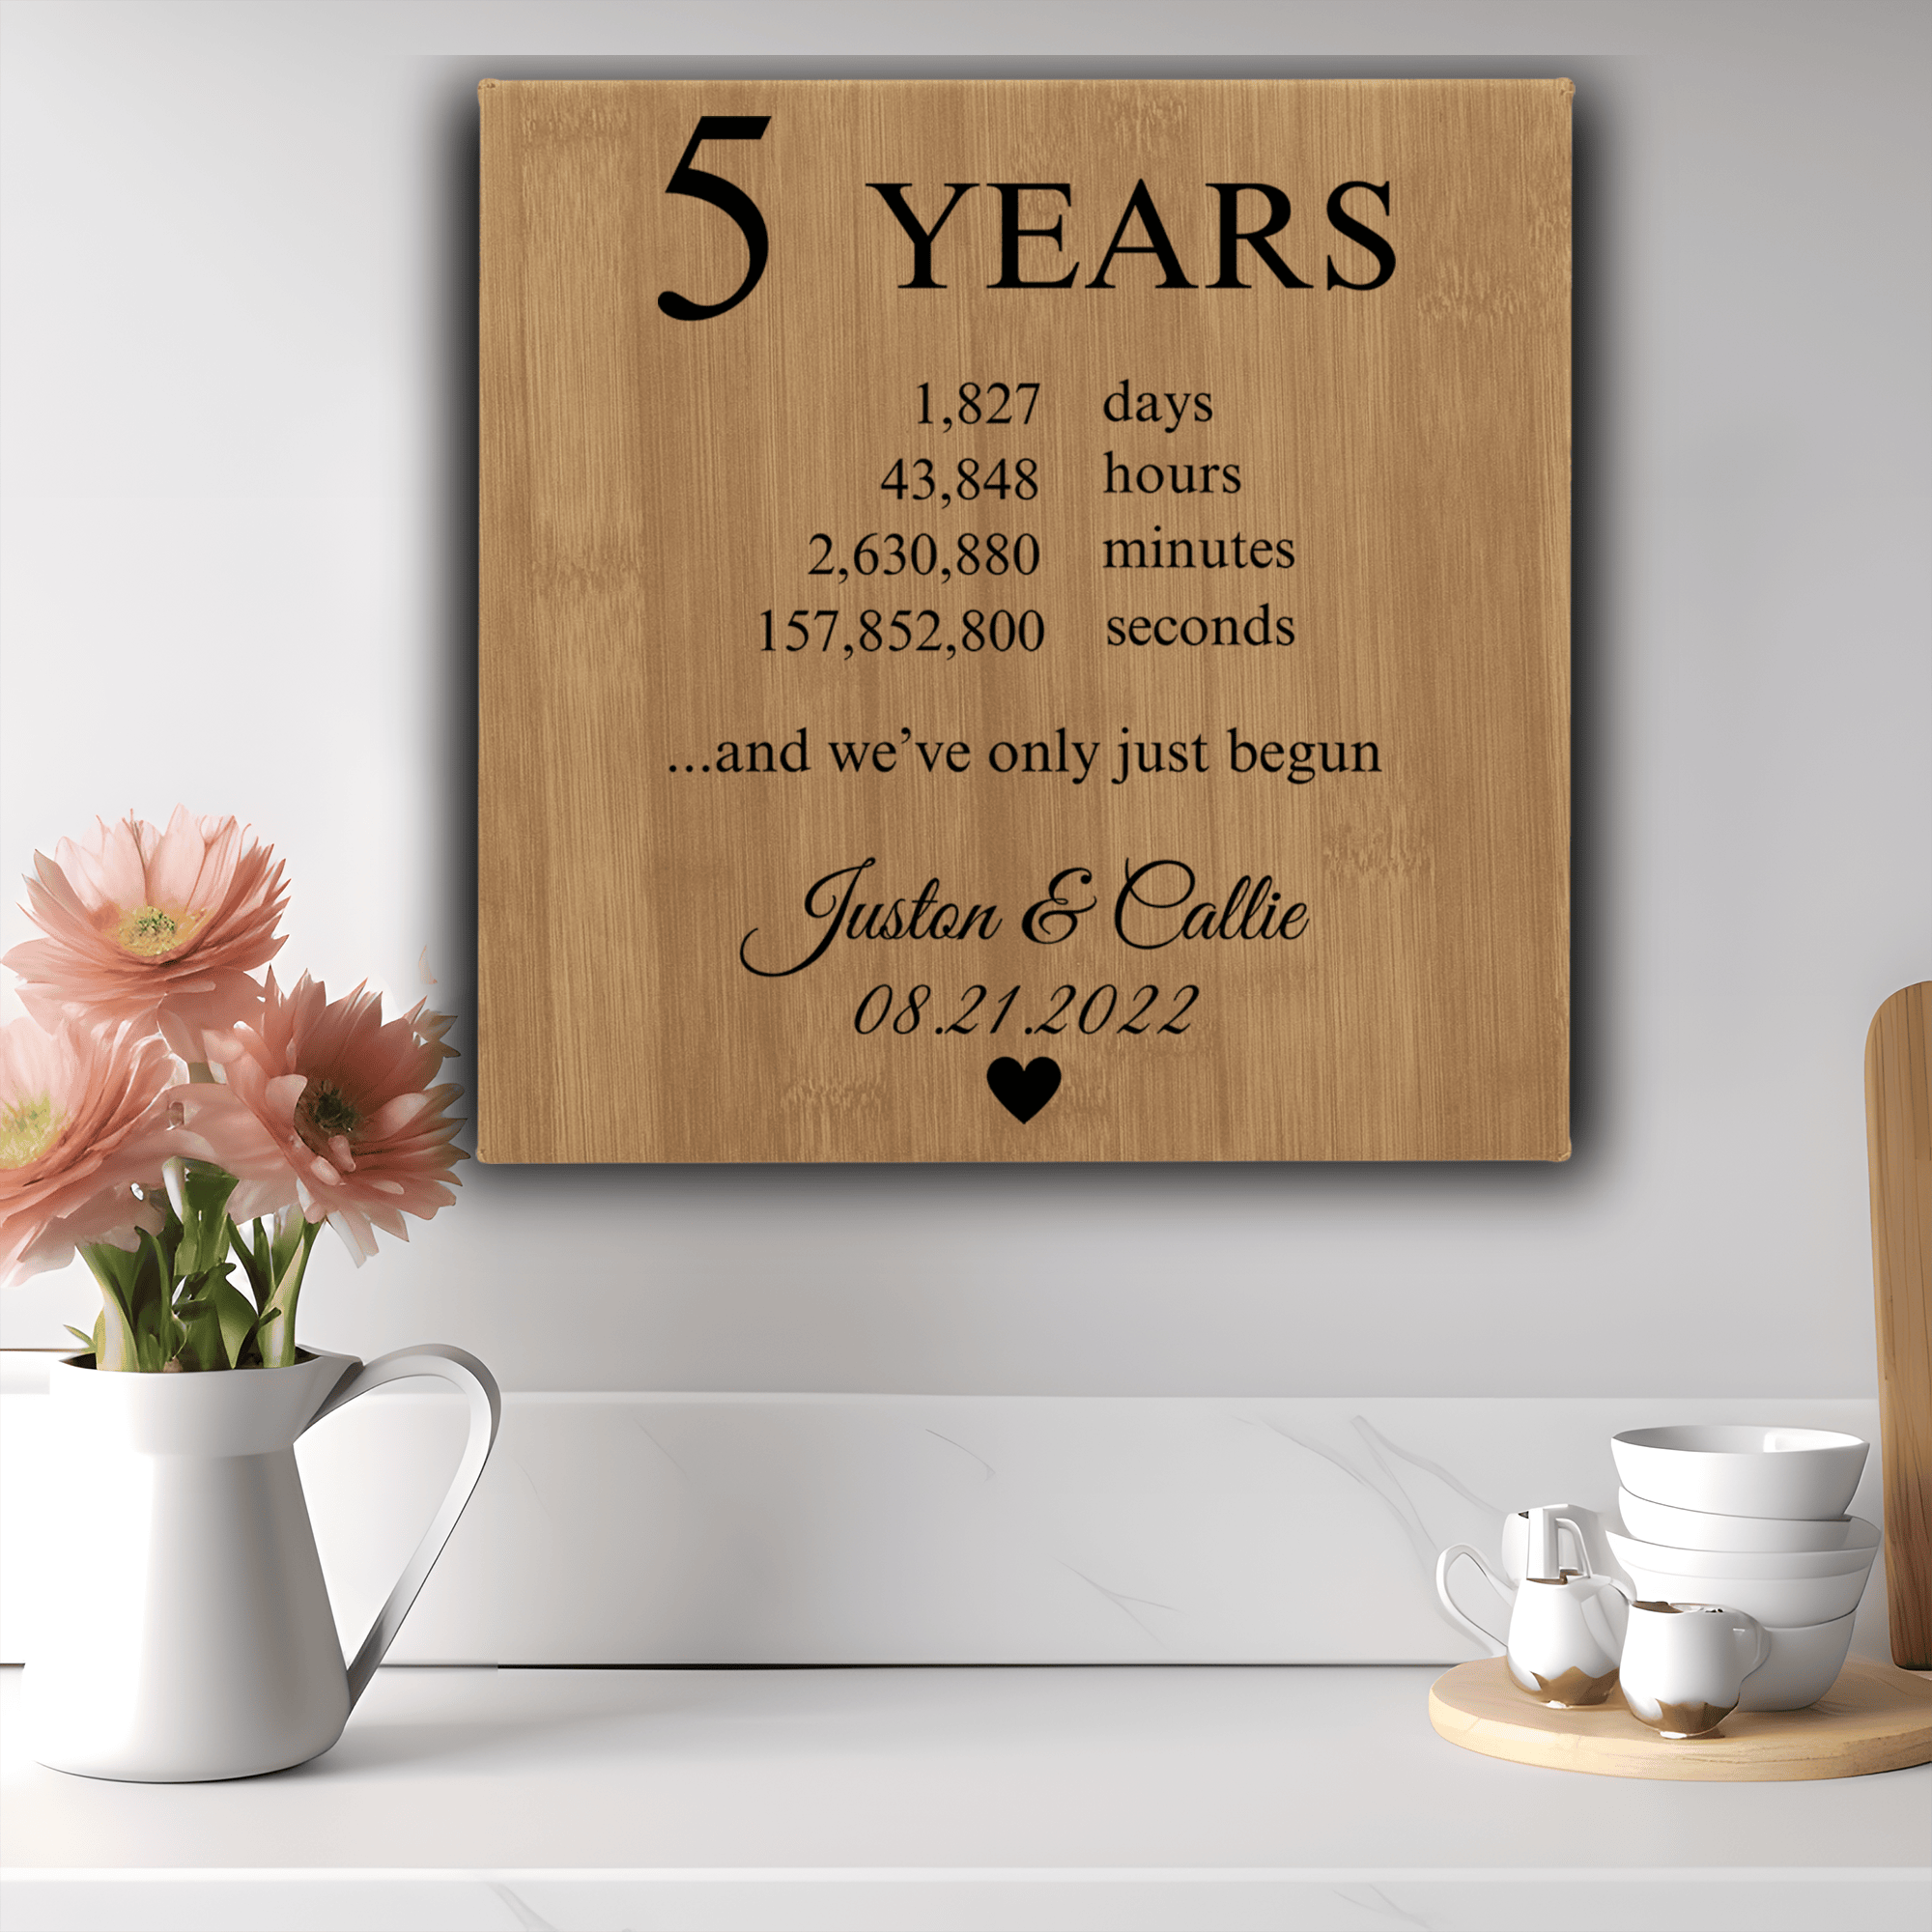 Bamboo Leather Wall Decor With 5 Year Anniversary Design